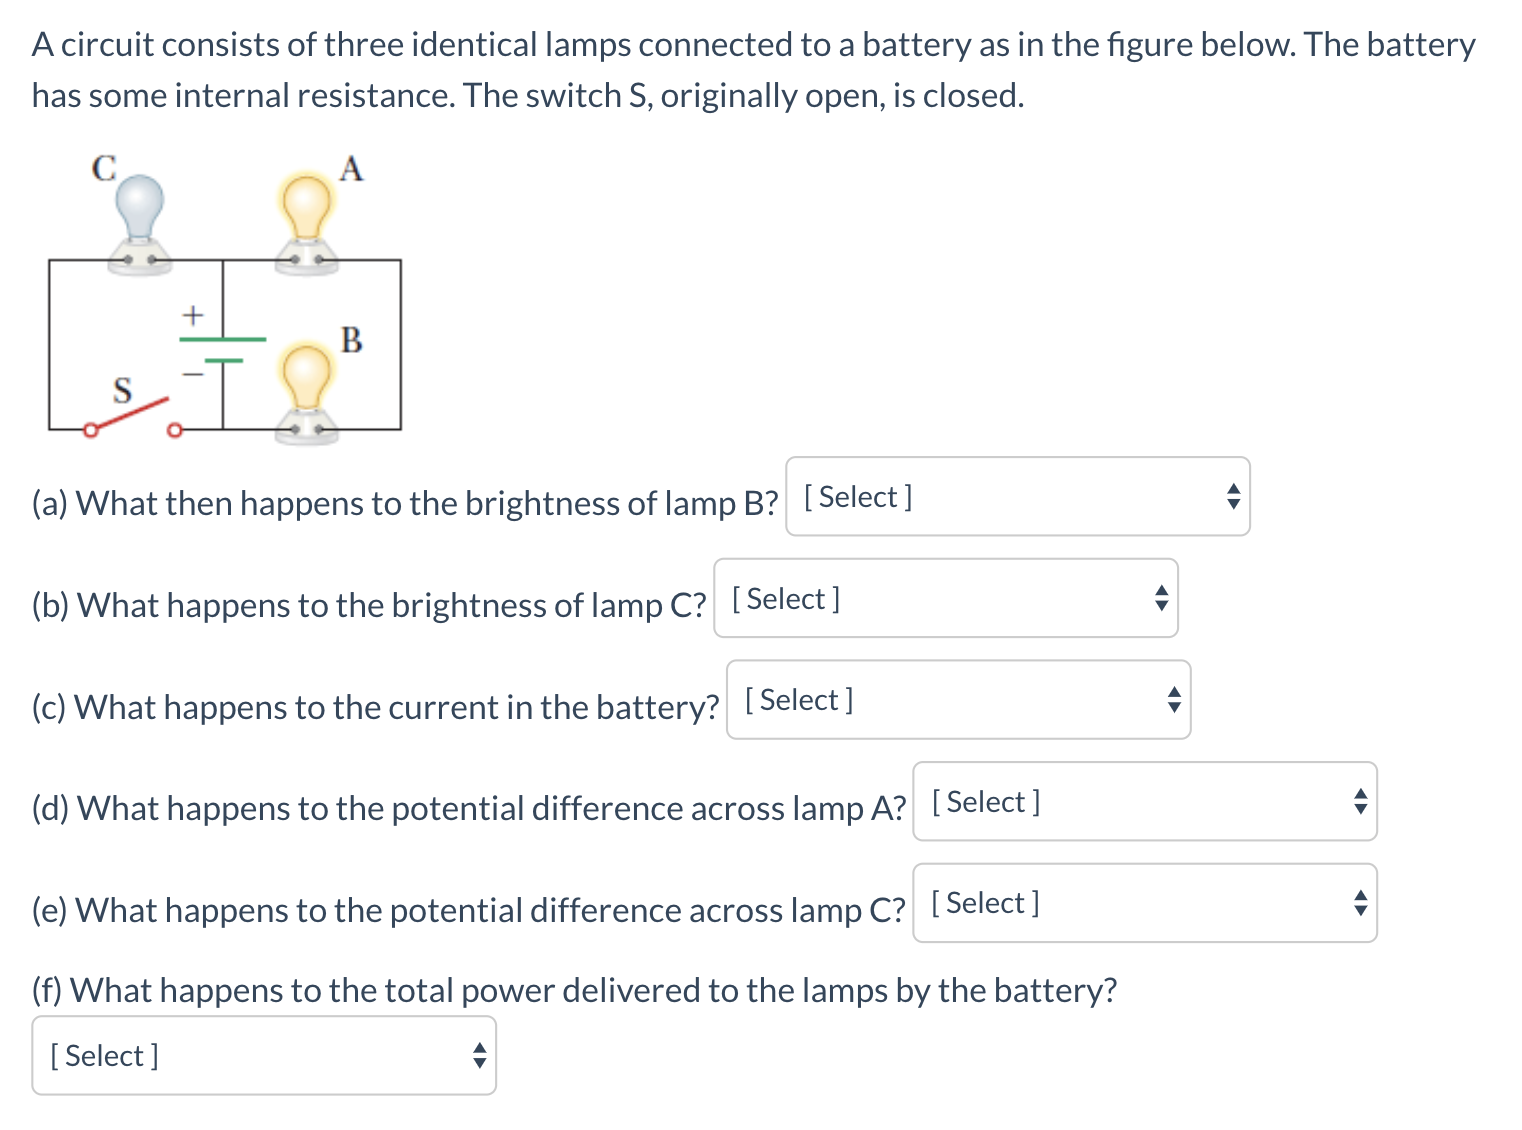 (d) What happens to the potential difference across lamp A? [Select]
(e) What happens to the potential difference across lamp C? [Select]
(f) What happens to the total power delivered to the lamps by the battery?
